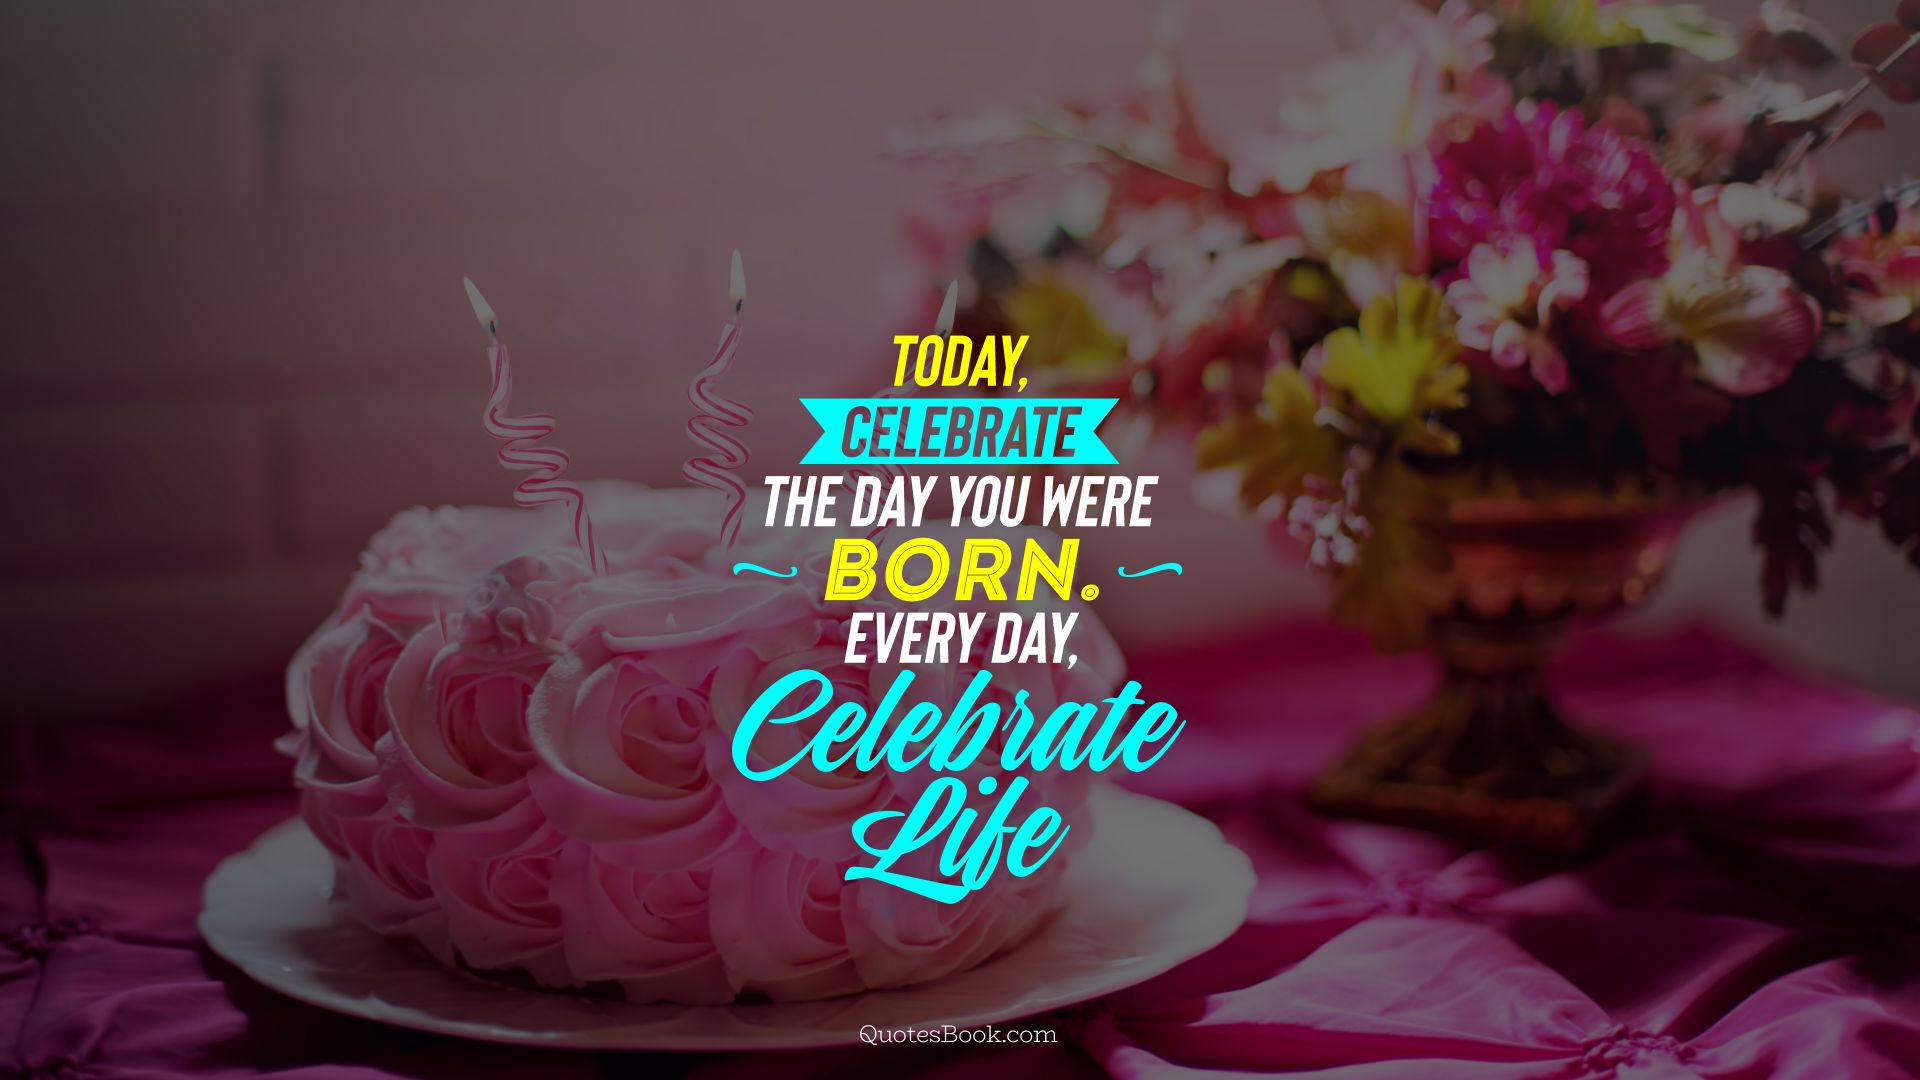 Today, celebrate the day you were born. every day, celebrate life